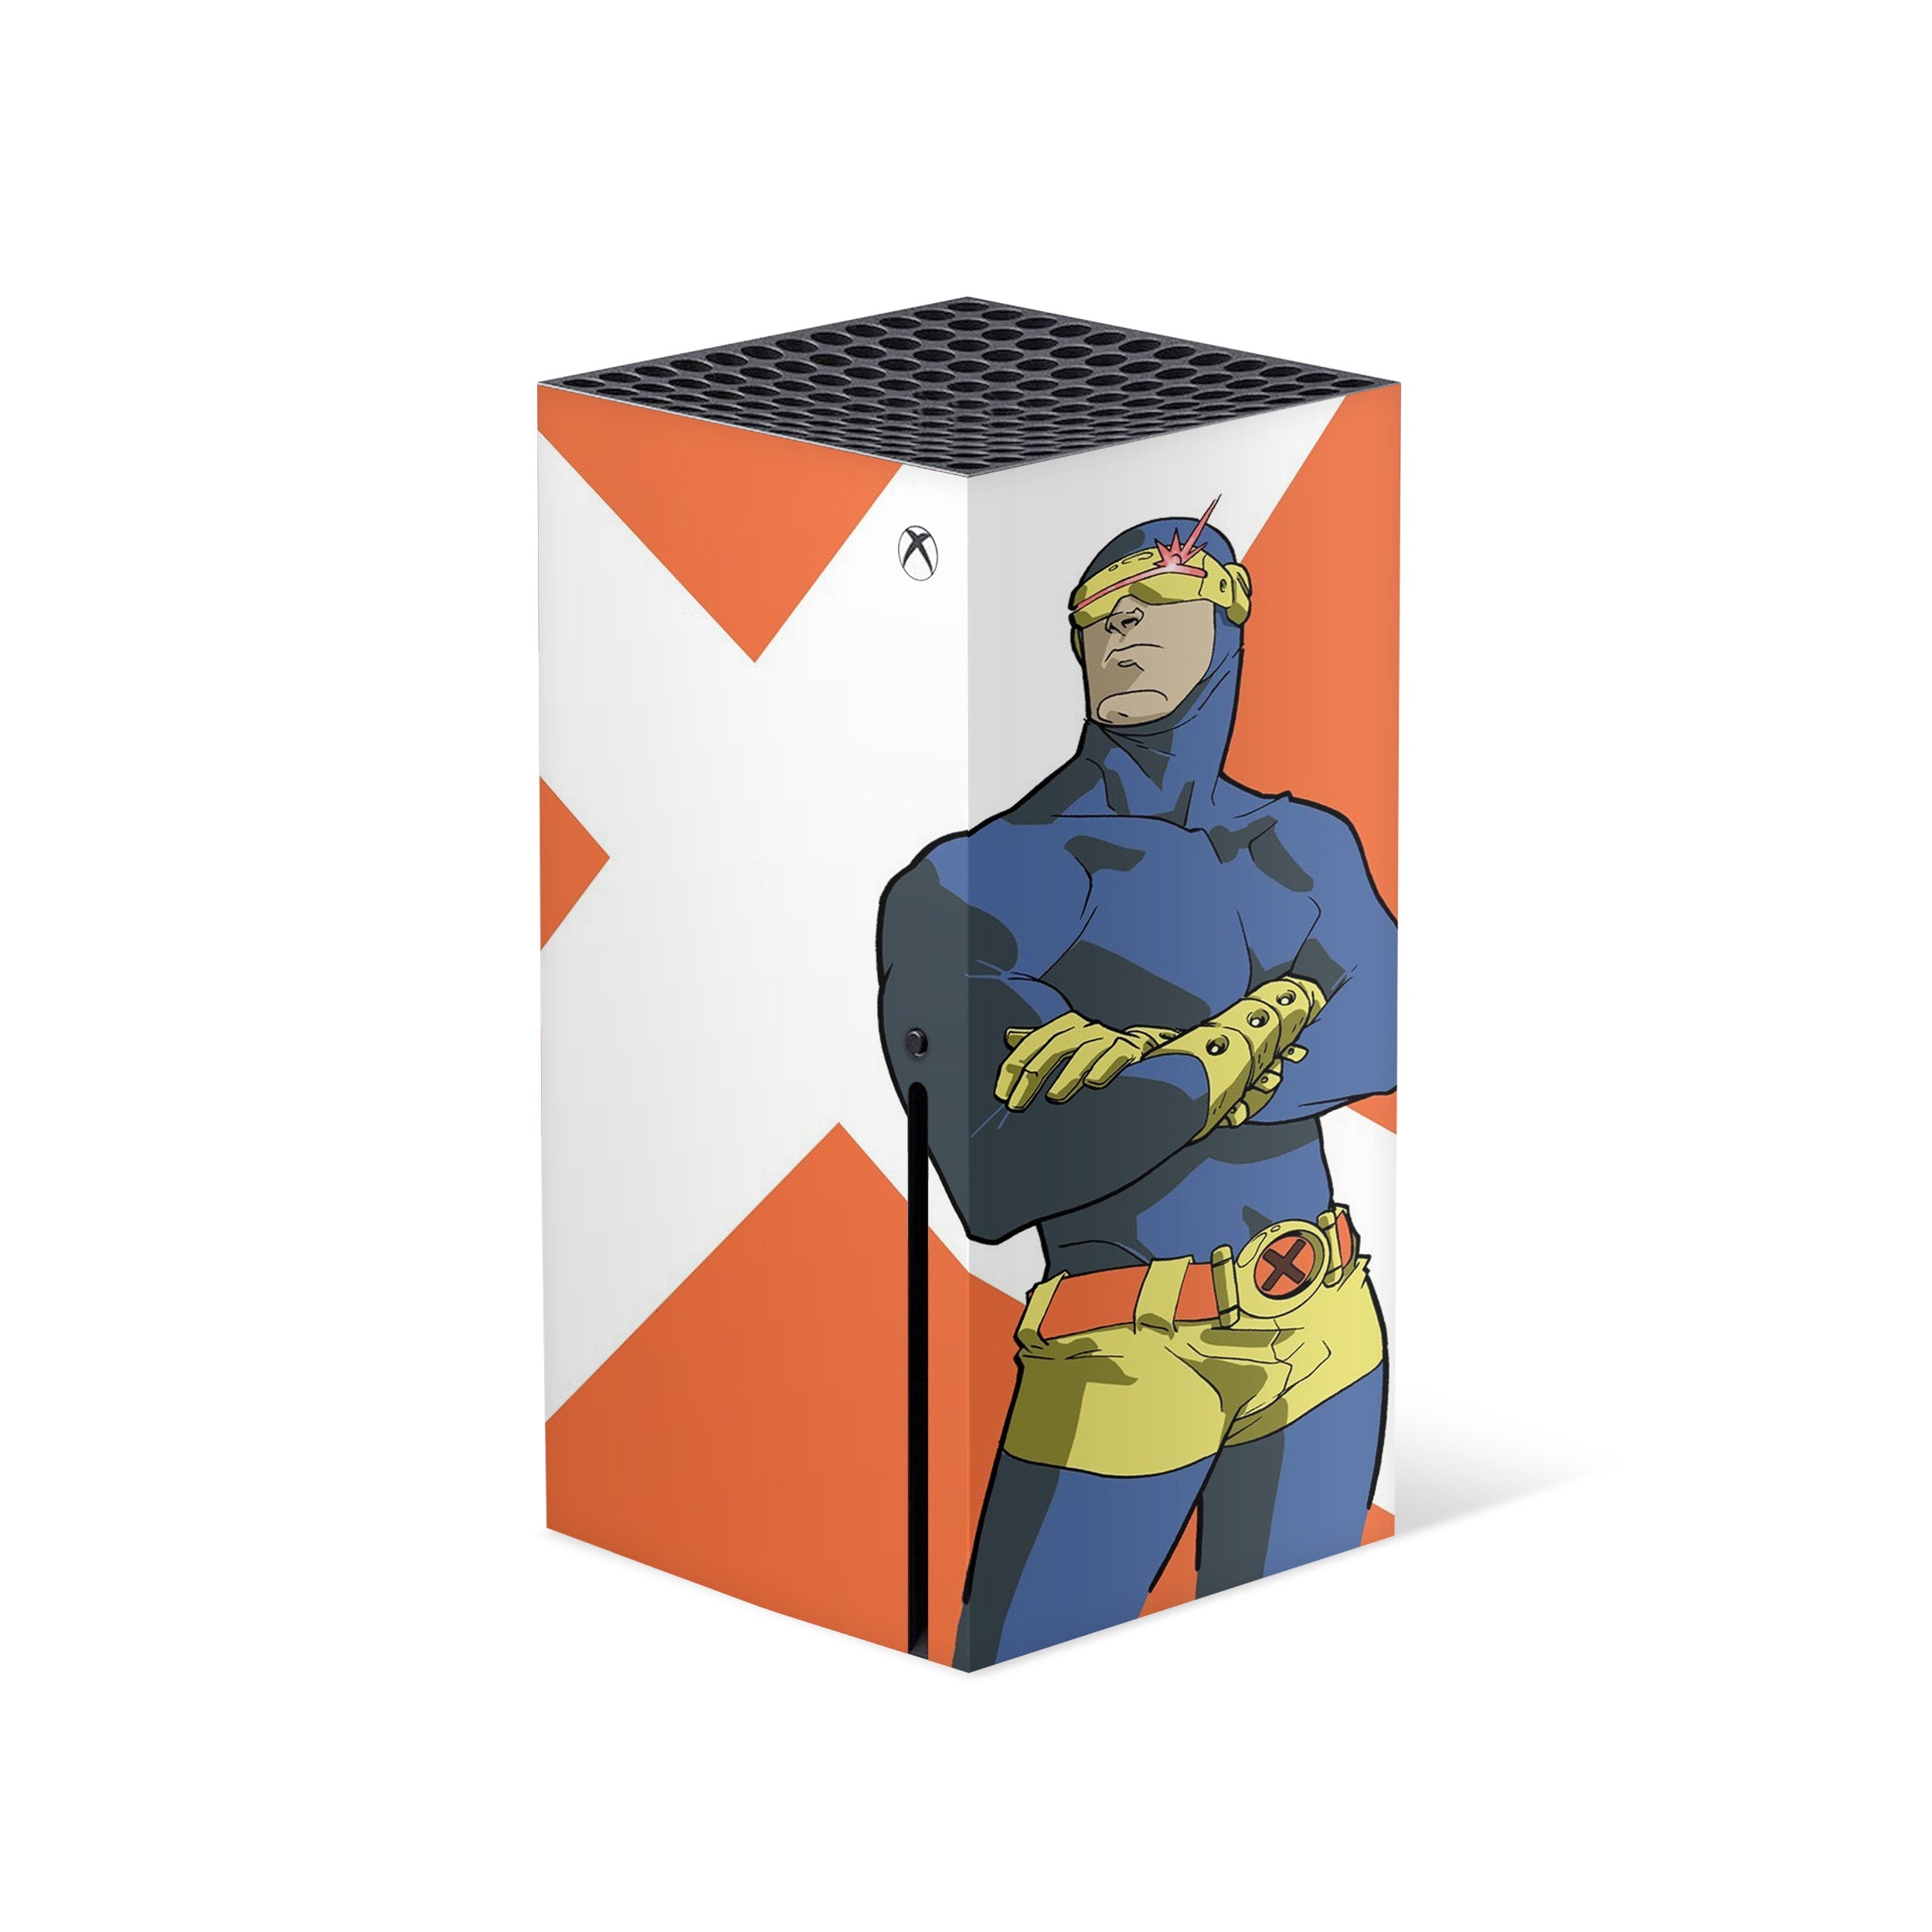 A video game skin featuring a Marvel Comics X Men Cyclops design for the Xbox Series X.